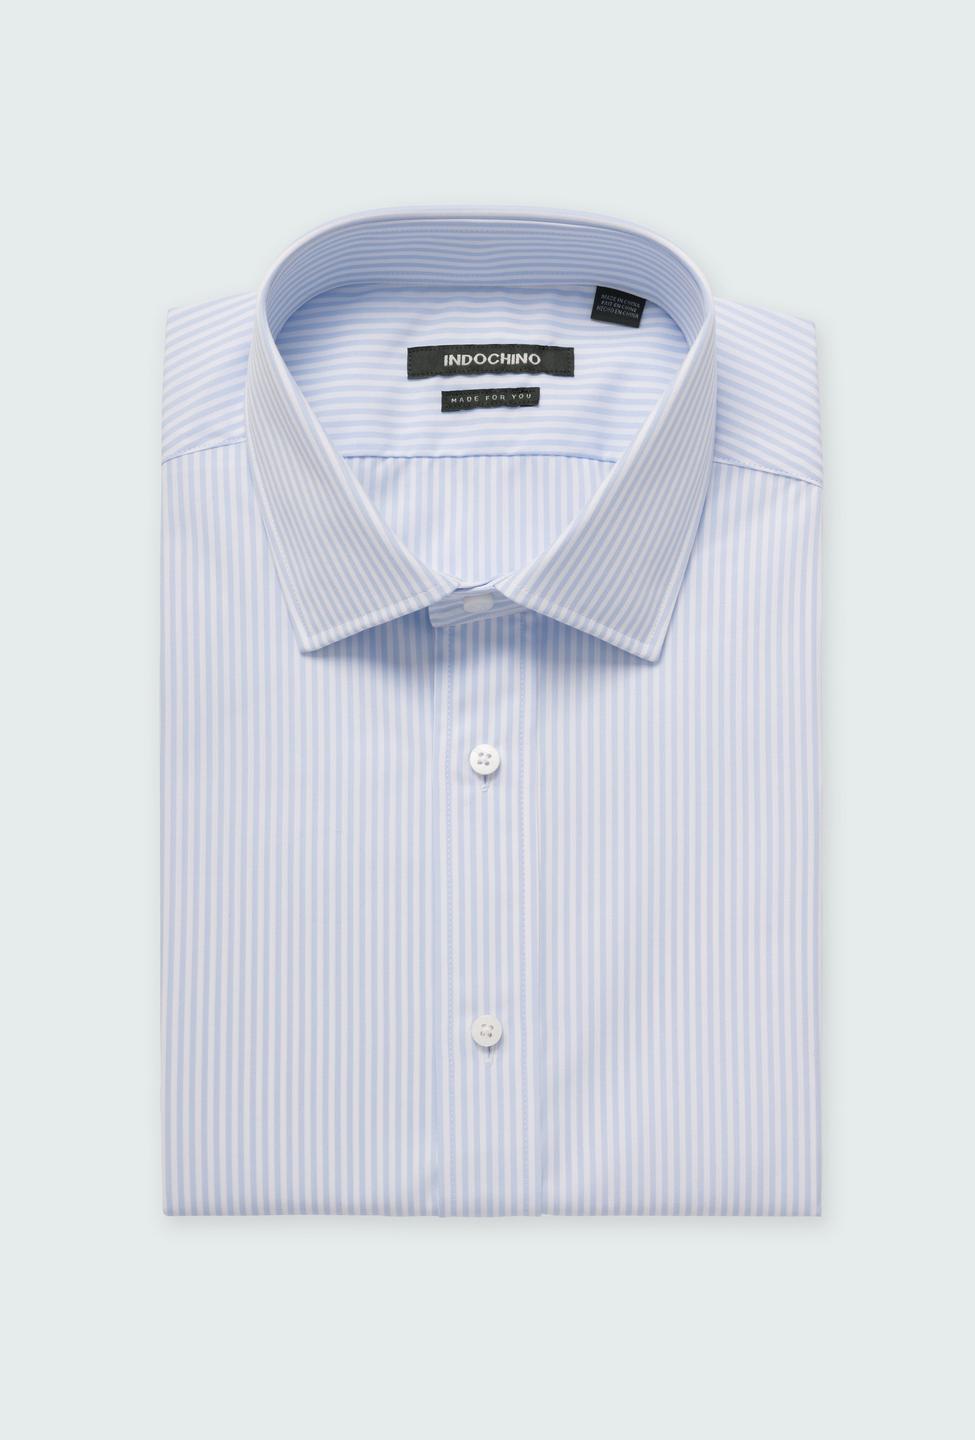 White shirt - Helston Striped Design from Premium Indochino Collection